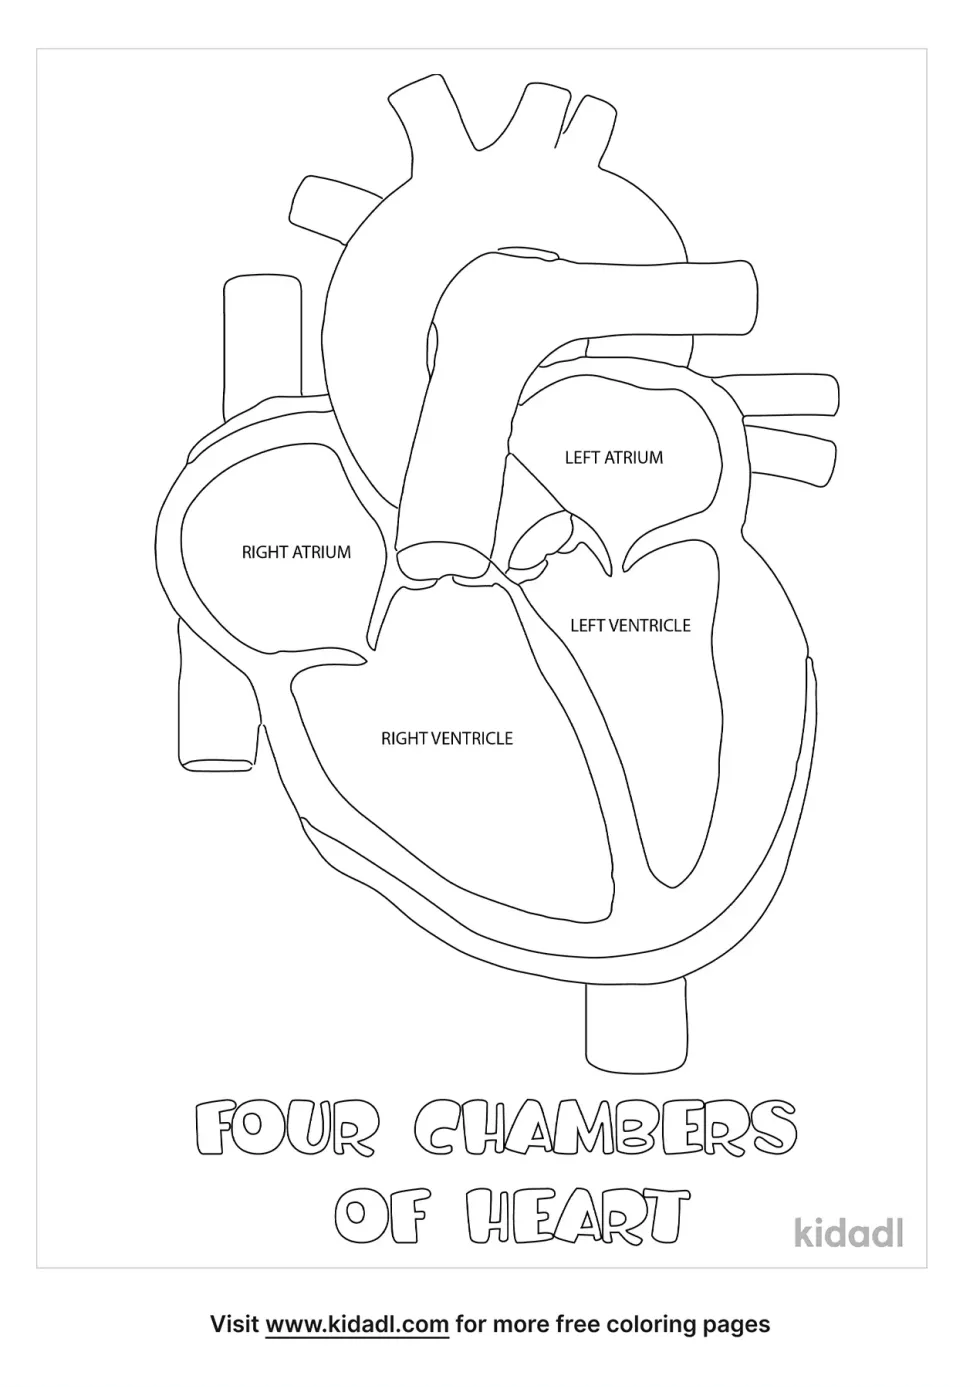 Four Chambers Of Heart